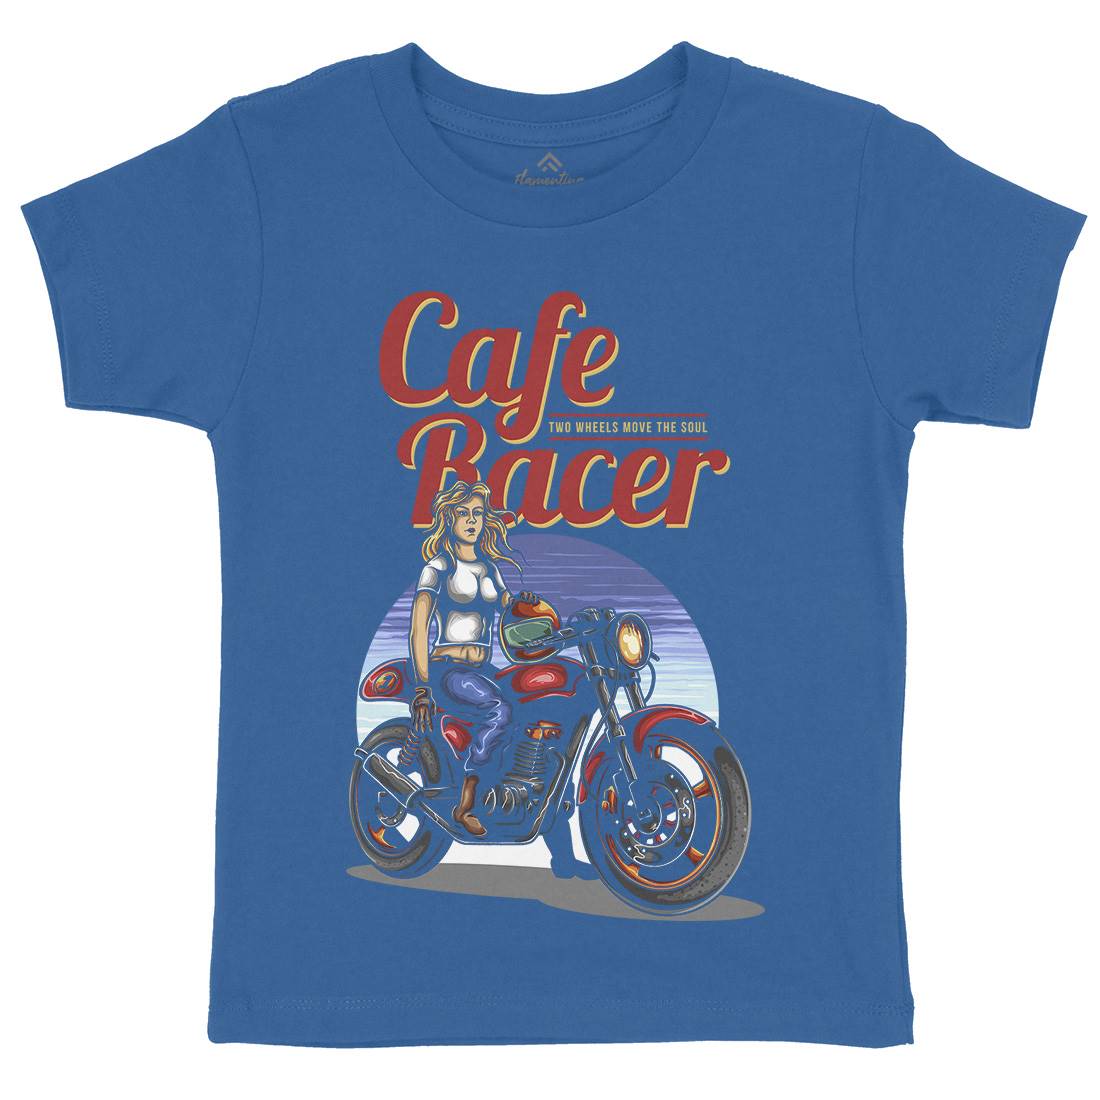 Cafe Racer Kids Crew Neck T-Shirt Motorcycles A407